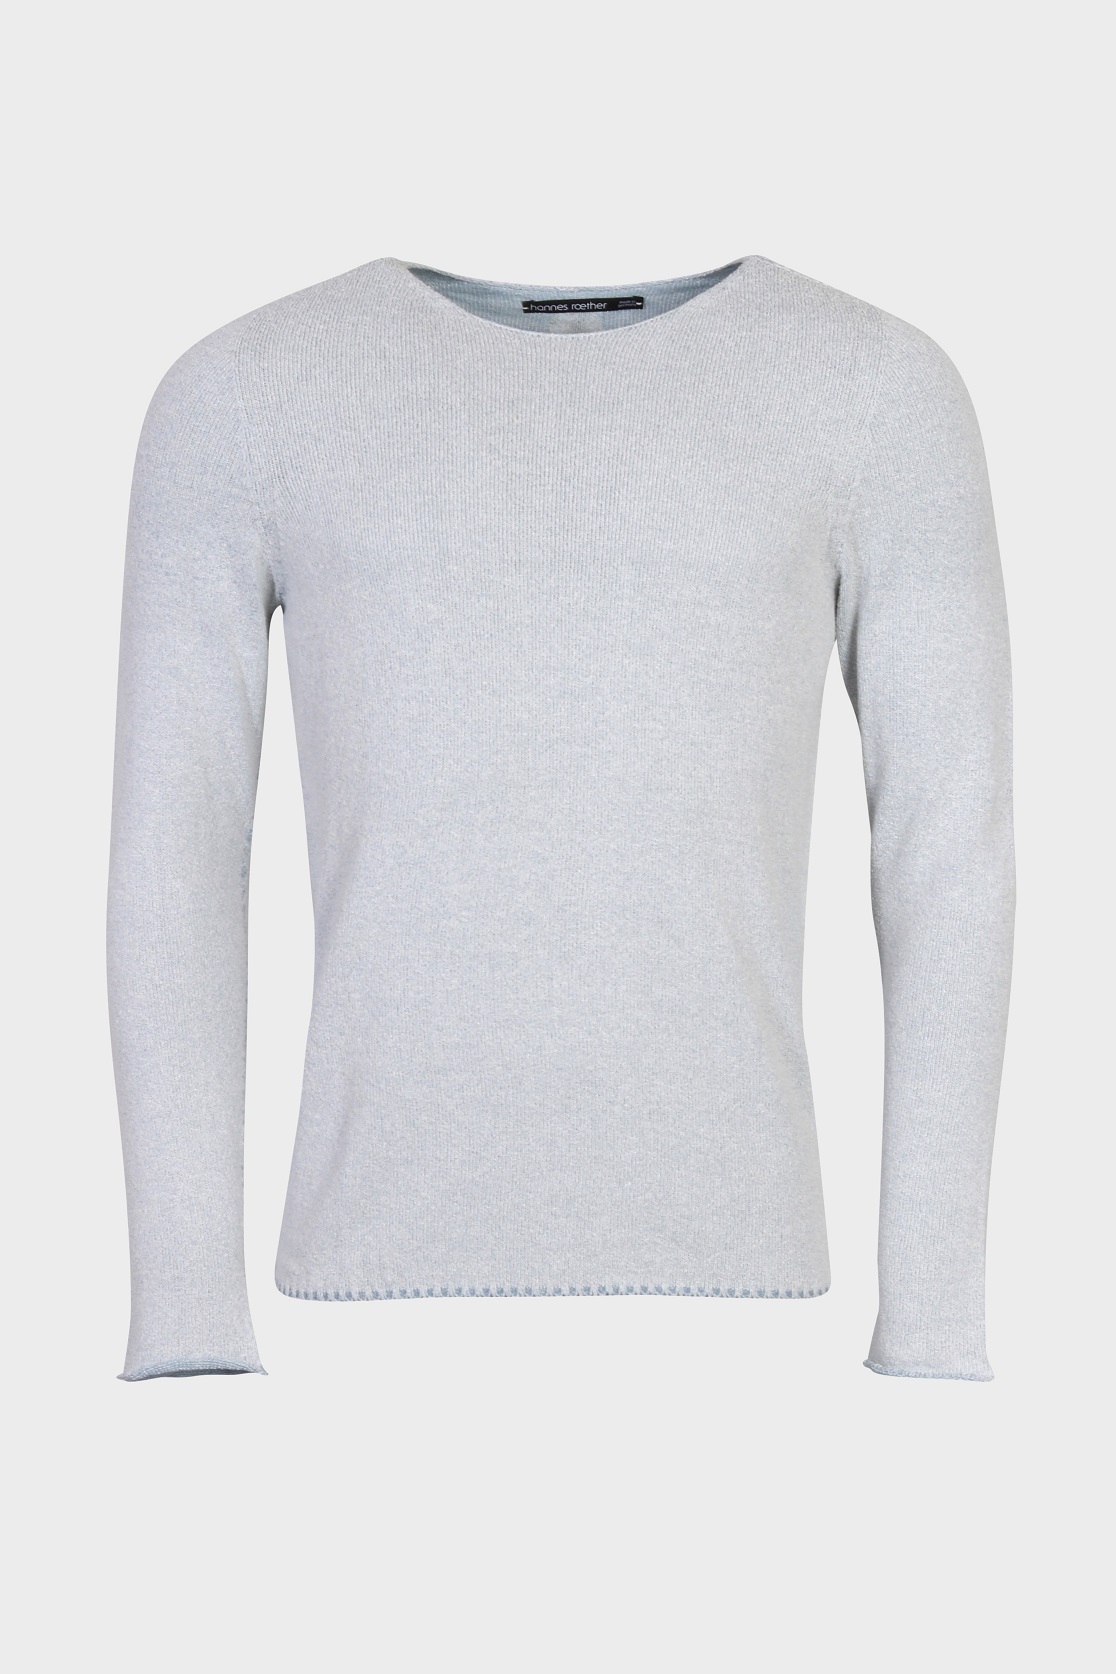 HANNES ROETHER Knit Sweater in Light Blue